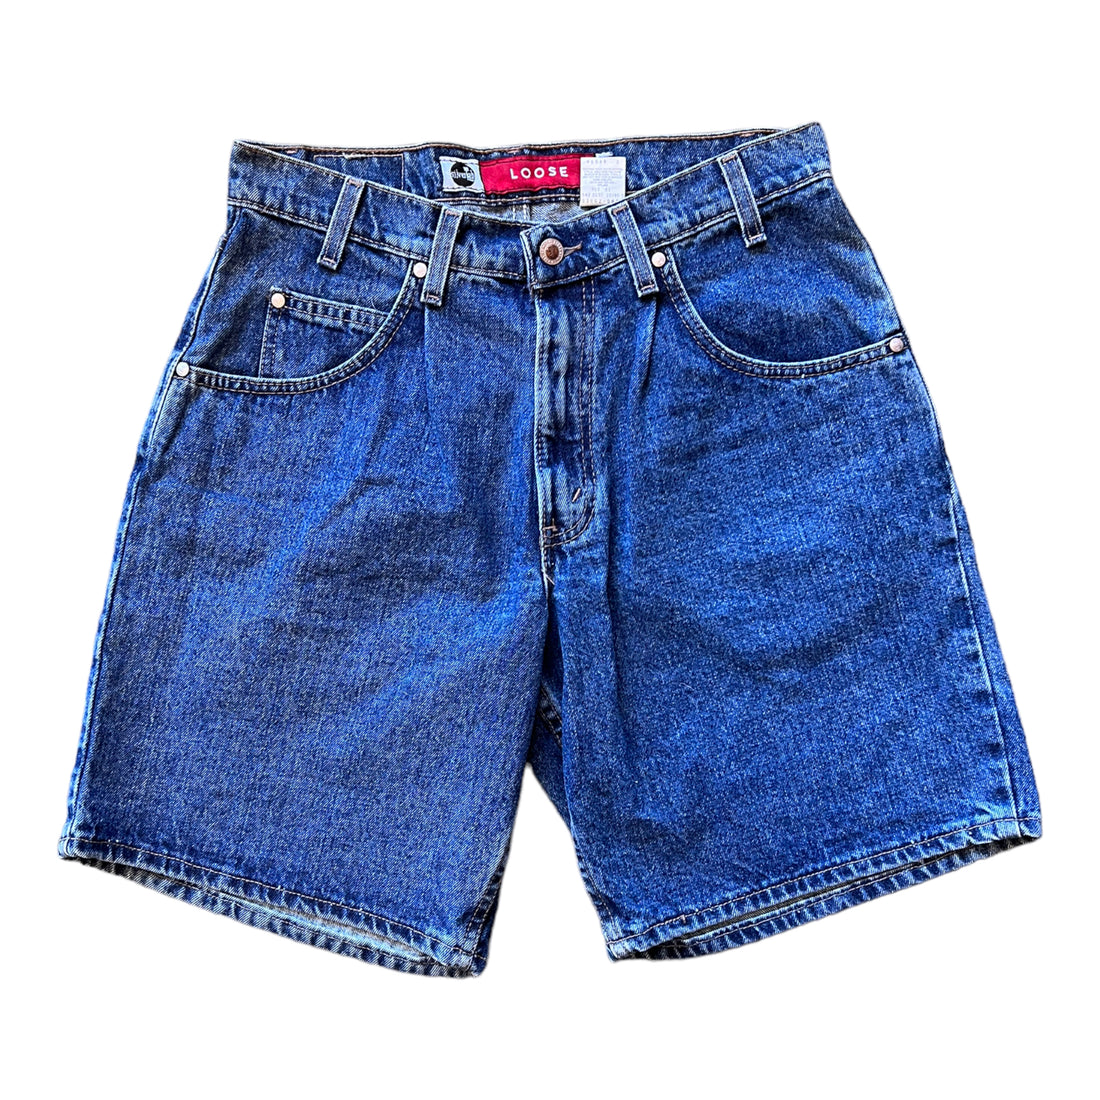 LEVI’S SILVER TAB “LOOSE” BAGGY SHORTS BLUE ‘32 WAIST’ - 2000S